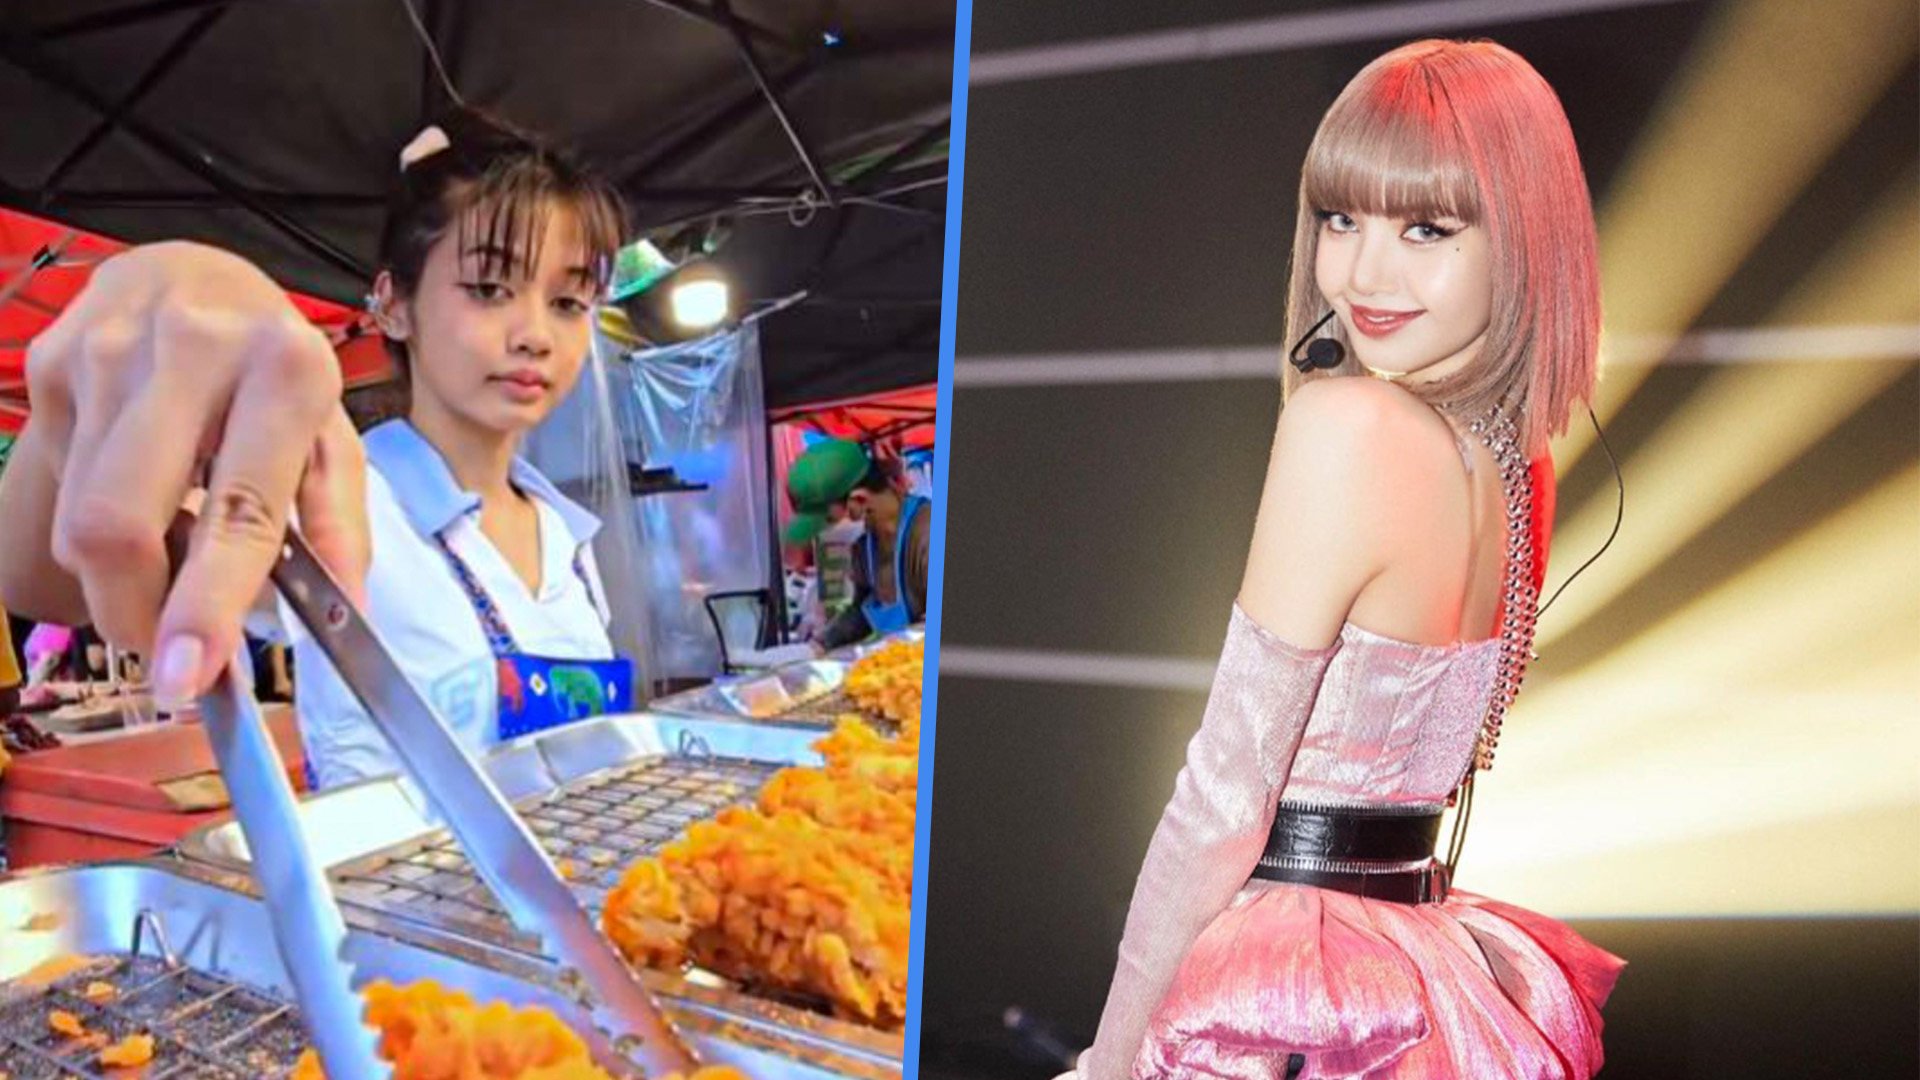 A teenage student in Thailand who helps out with her mother’s fried chicken stall has become an online sensation thanks to her resemblance to K-pop rapper and dancer Lisa from the girl band, Blackpink. Photo: SCMP composite/Facebook/Instagram@lalalalisa